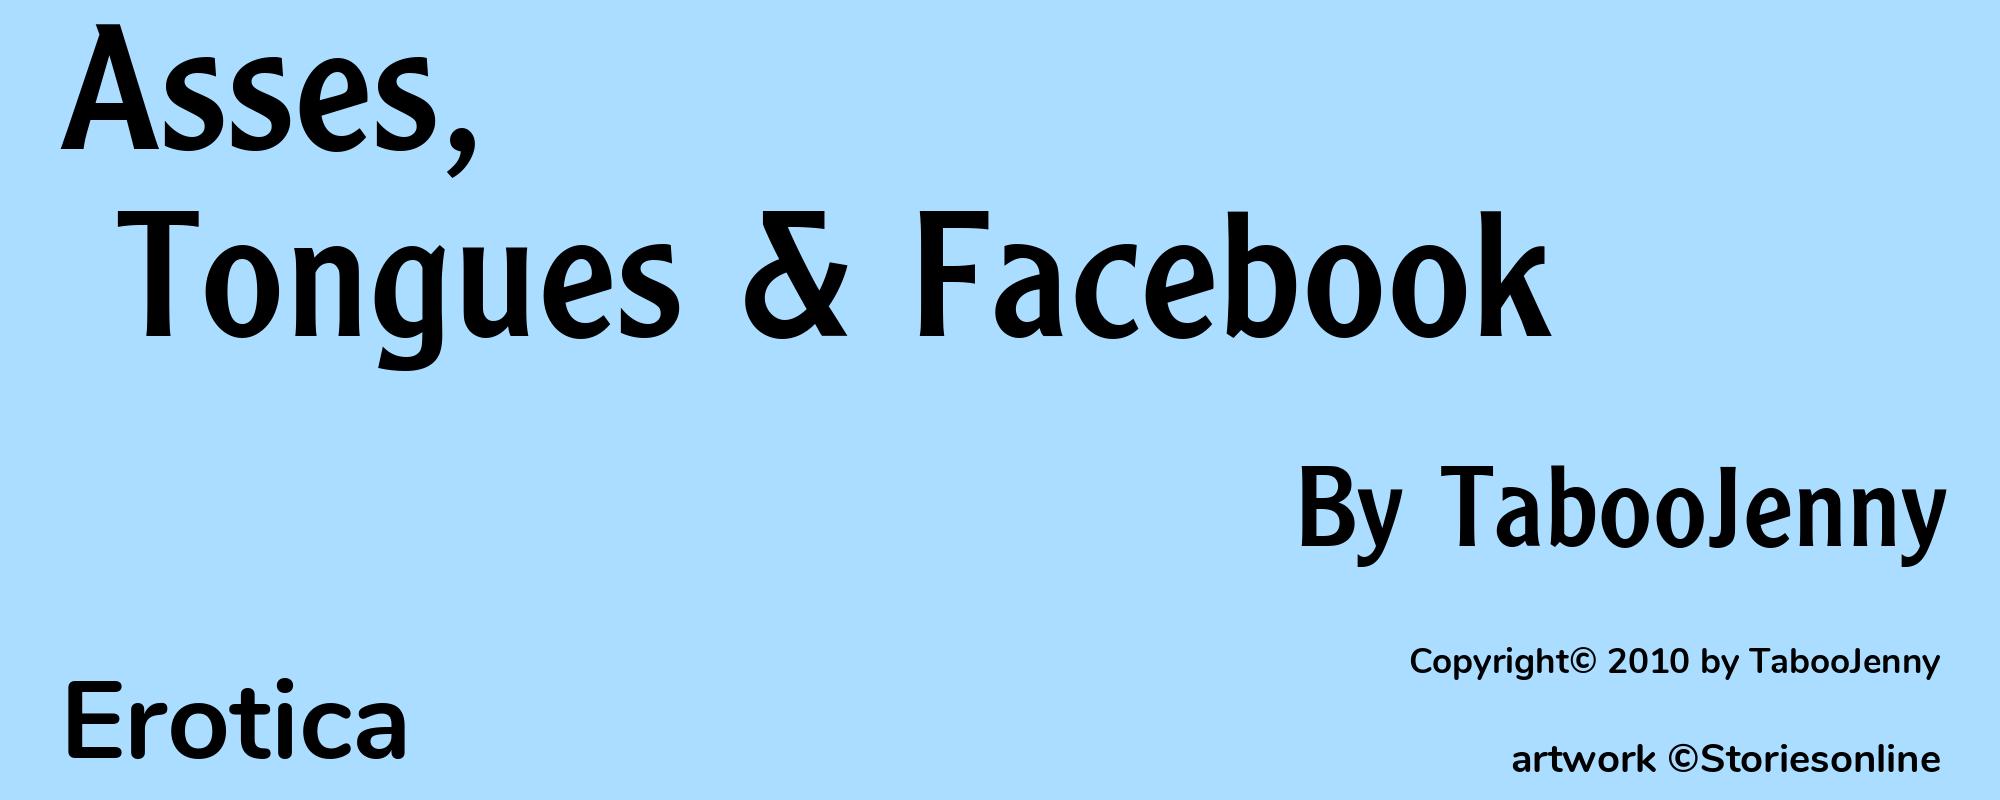 Asses, Tongues & Facebook - Cover